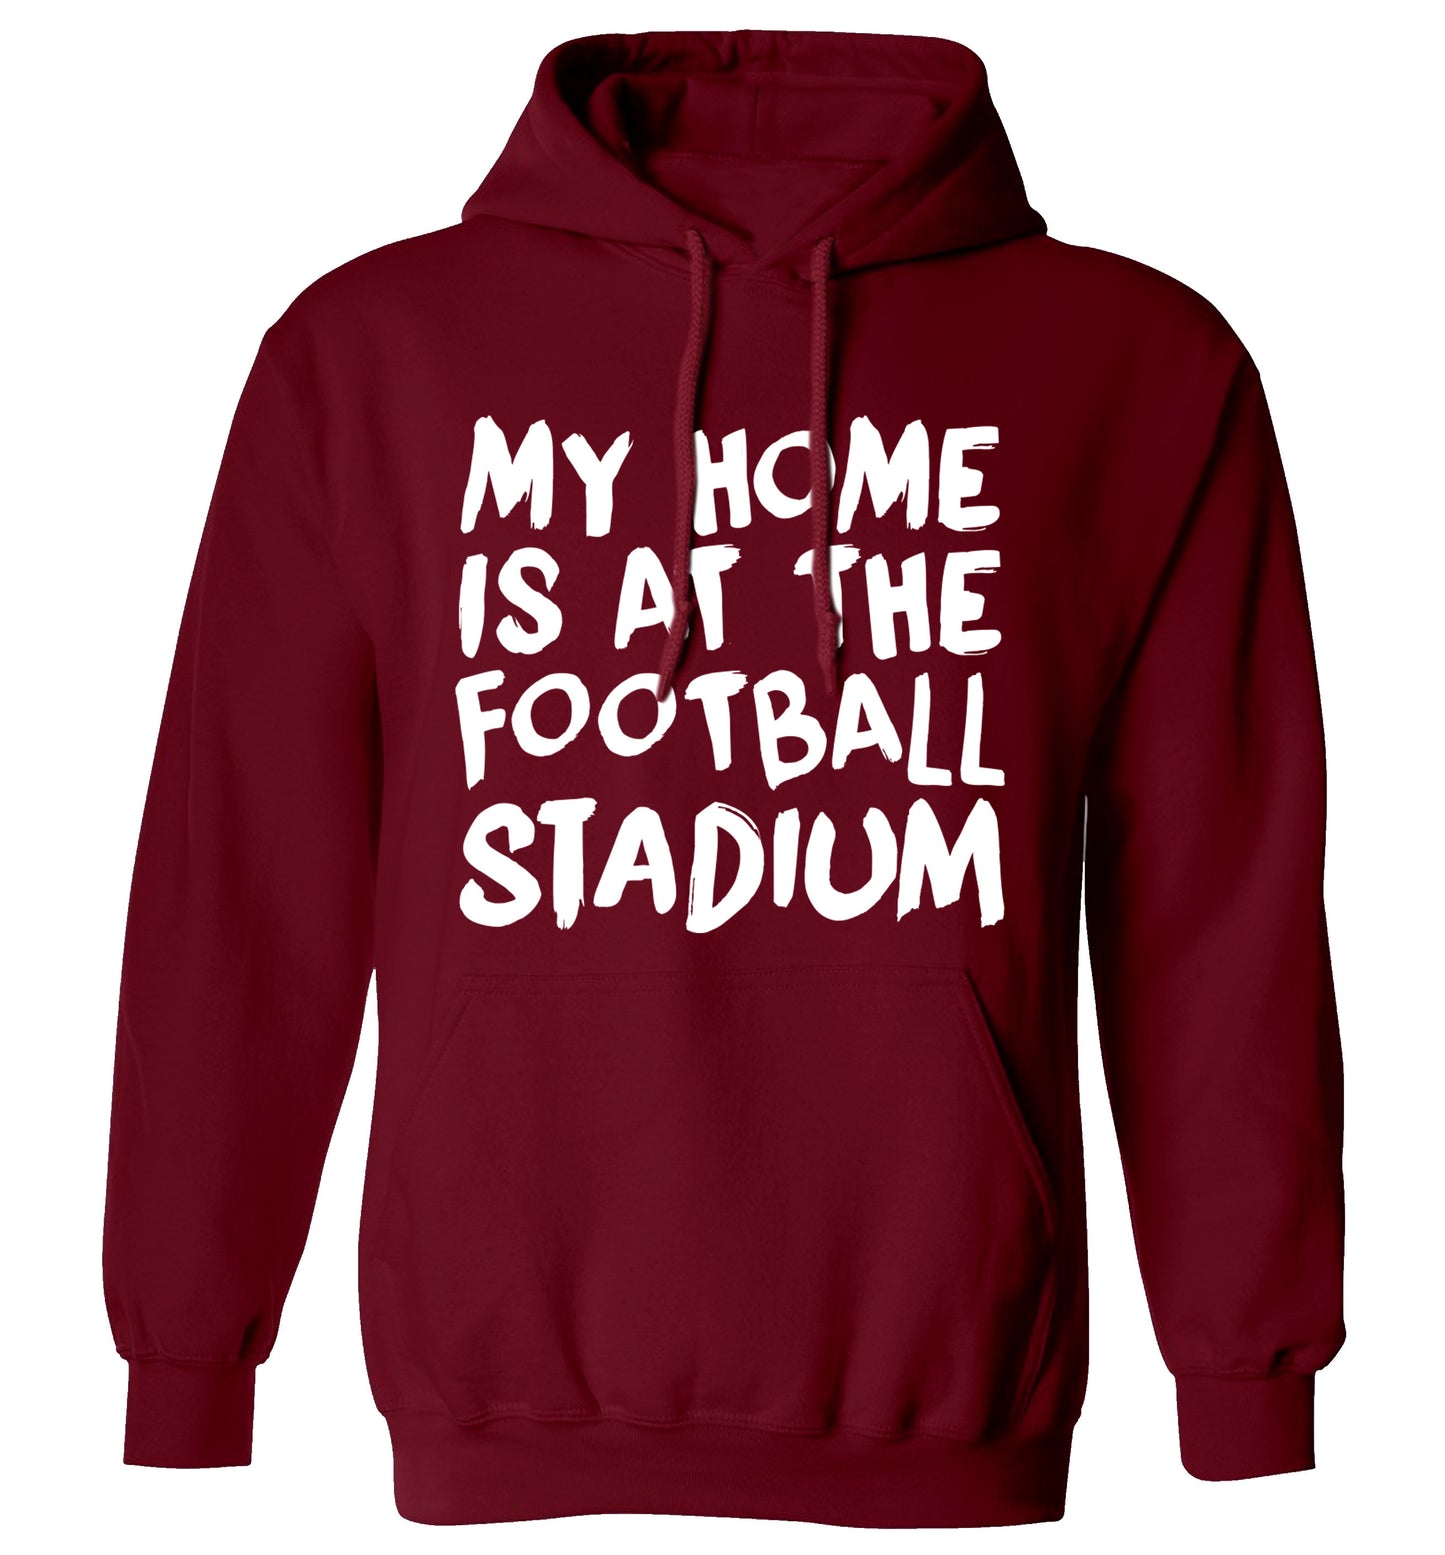 My home is at the football stadium adults unisex maroon hoodie 2XL